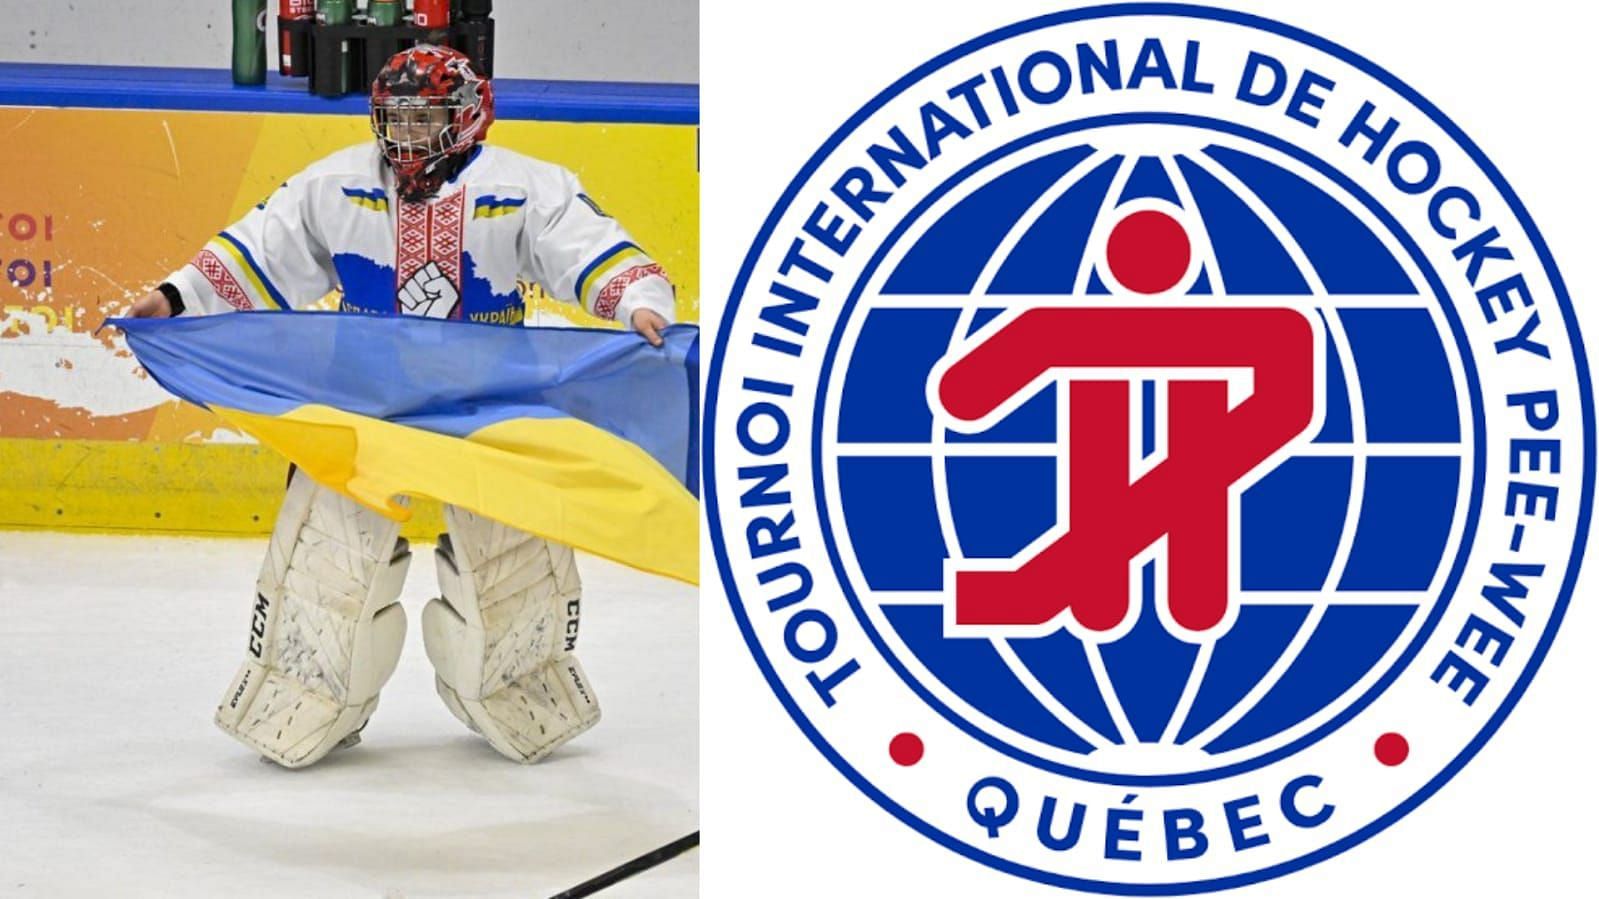 Ukraine Selects, a team of Ukrainian refugees played in the Quebec International Pee-Wee Hockey Tournament held in Quebec City